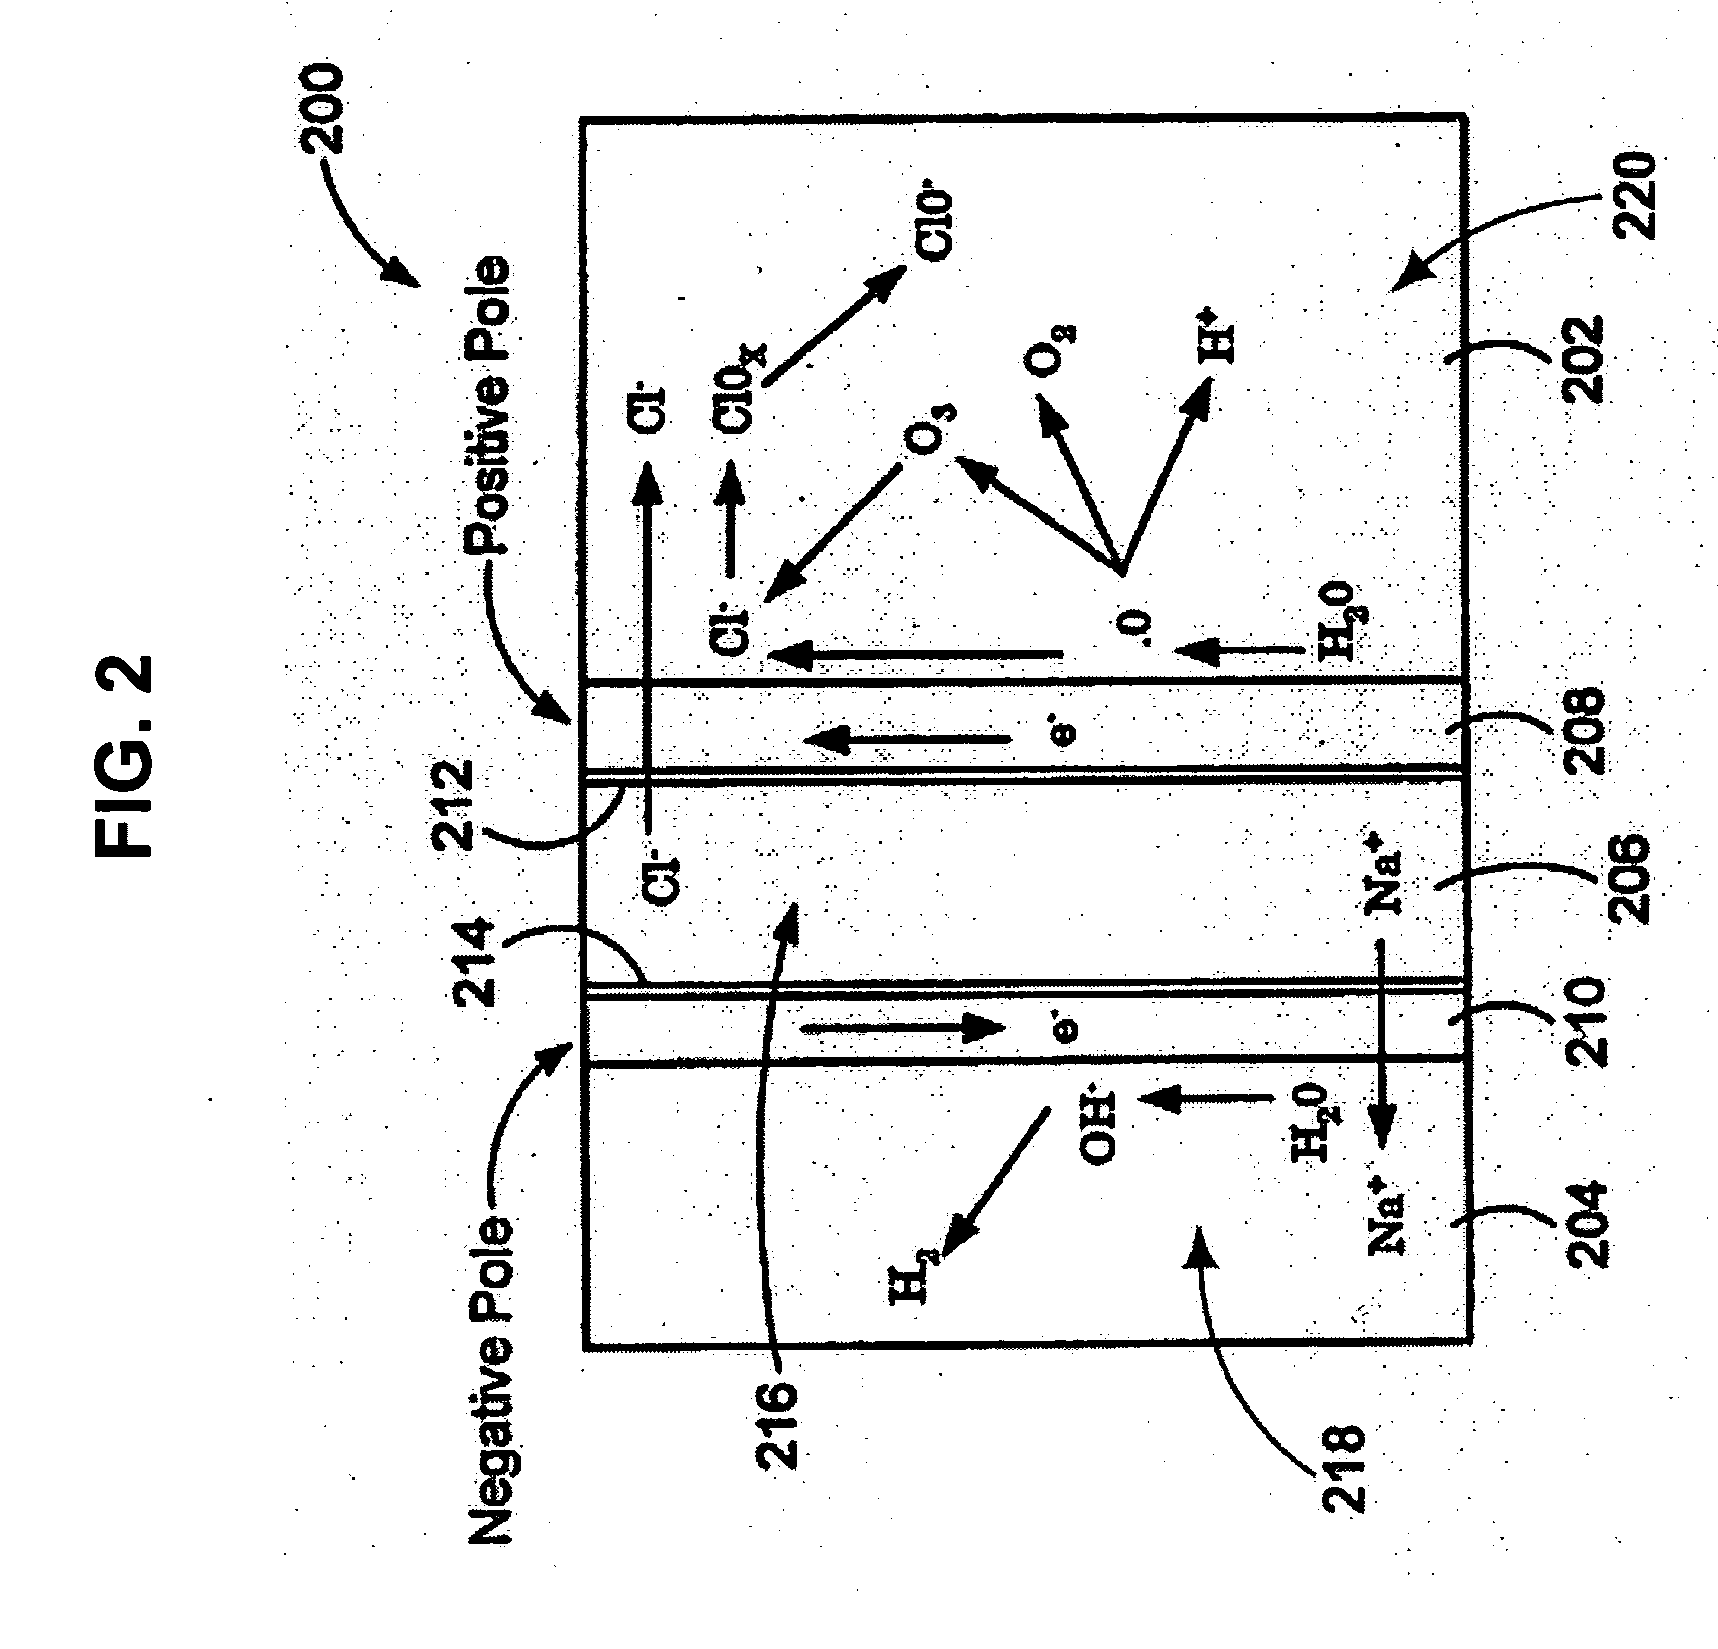 Method of using oxidative reductive potential water solution in dental applications